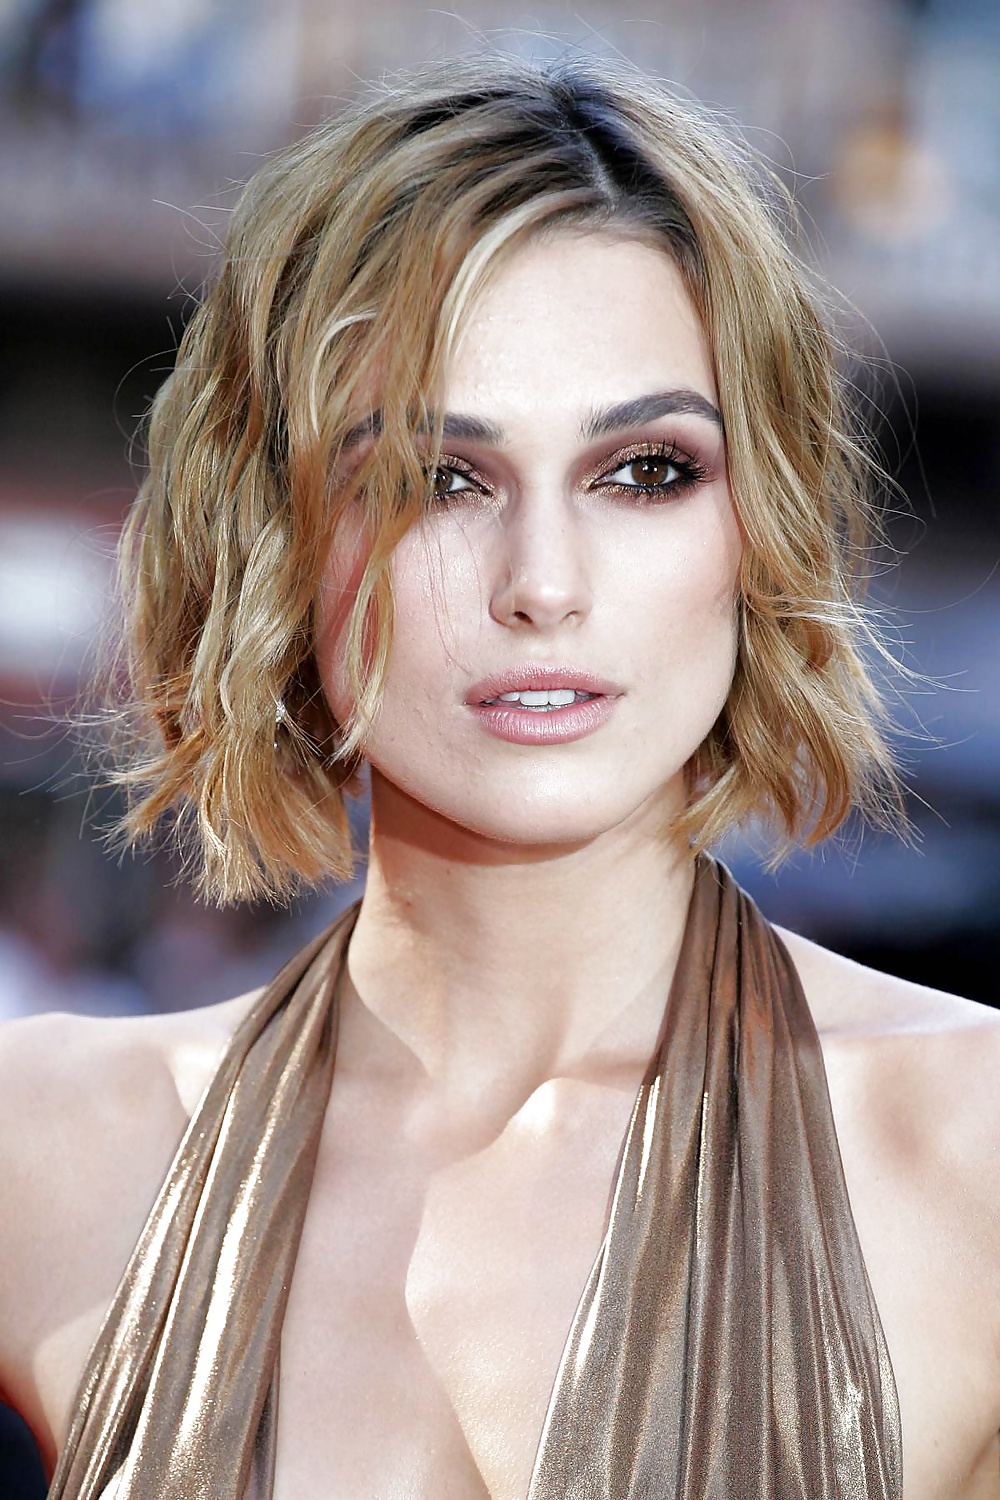 Keira Knightley The Royal Lady of England #35649892